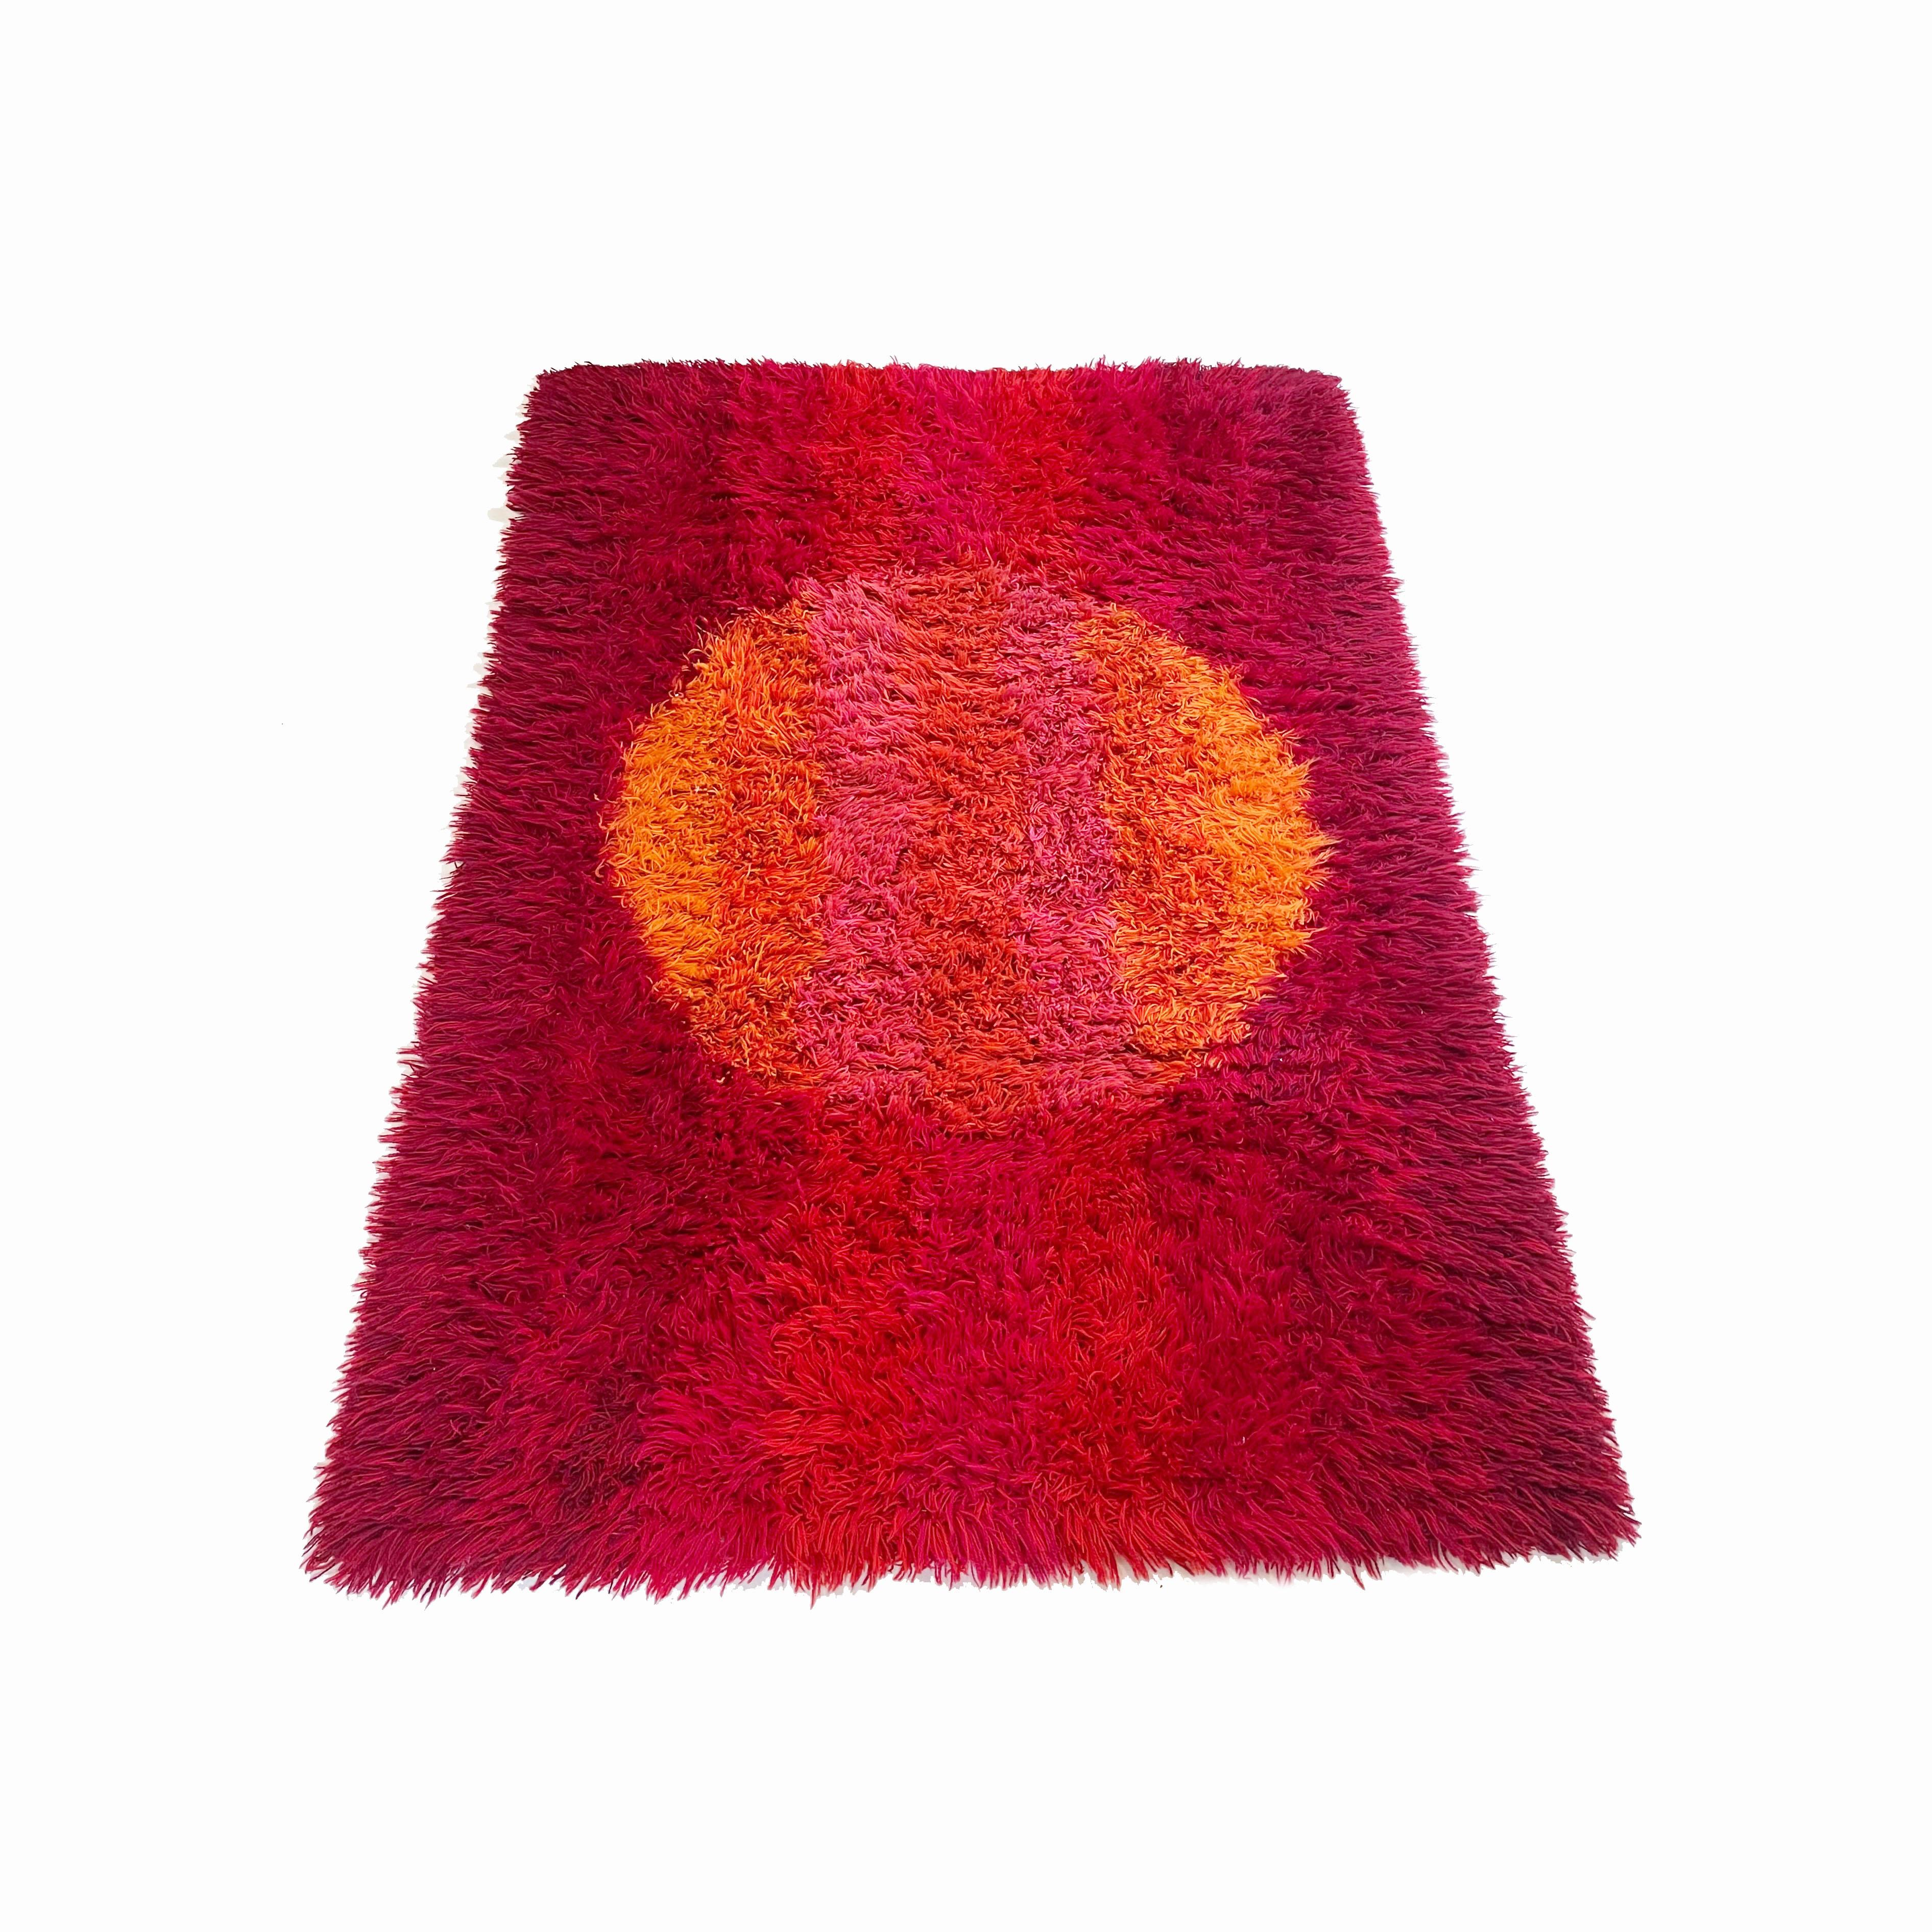 Article:

High pile Rya rug


Decade:

1970s


Origin:

Scandinavia, Sweden


Material:

100% wool



This rug is a great example of 1970s pop art interior. Made in high quality Rya weaving technique in Finland in the 1970s, it